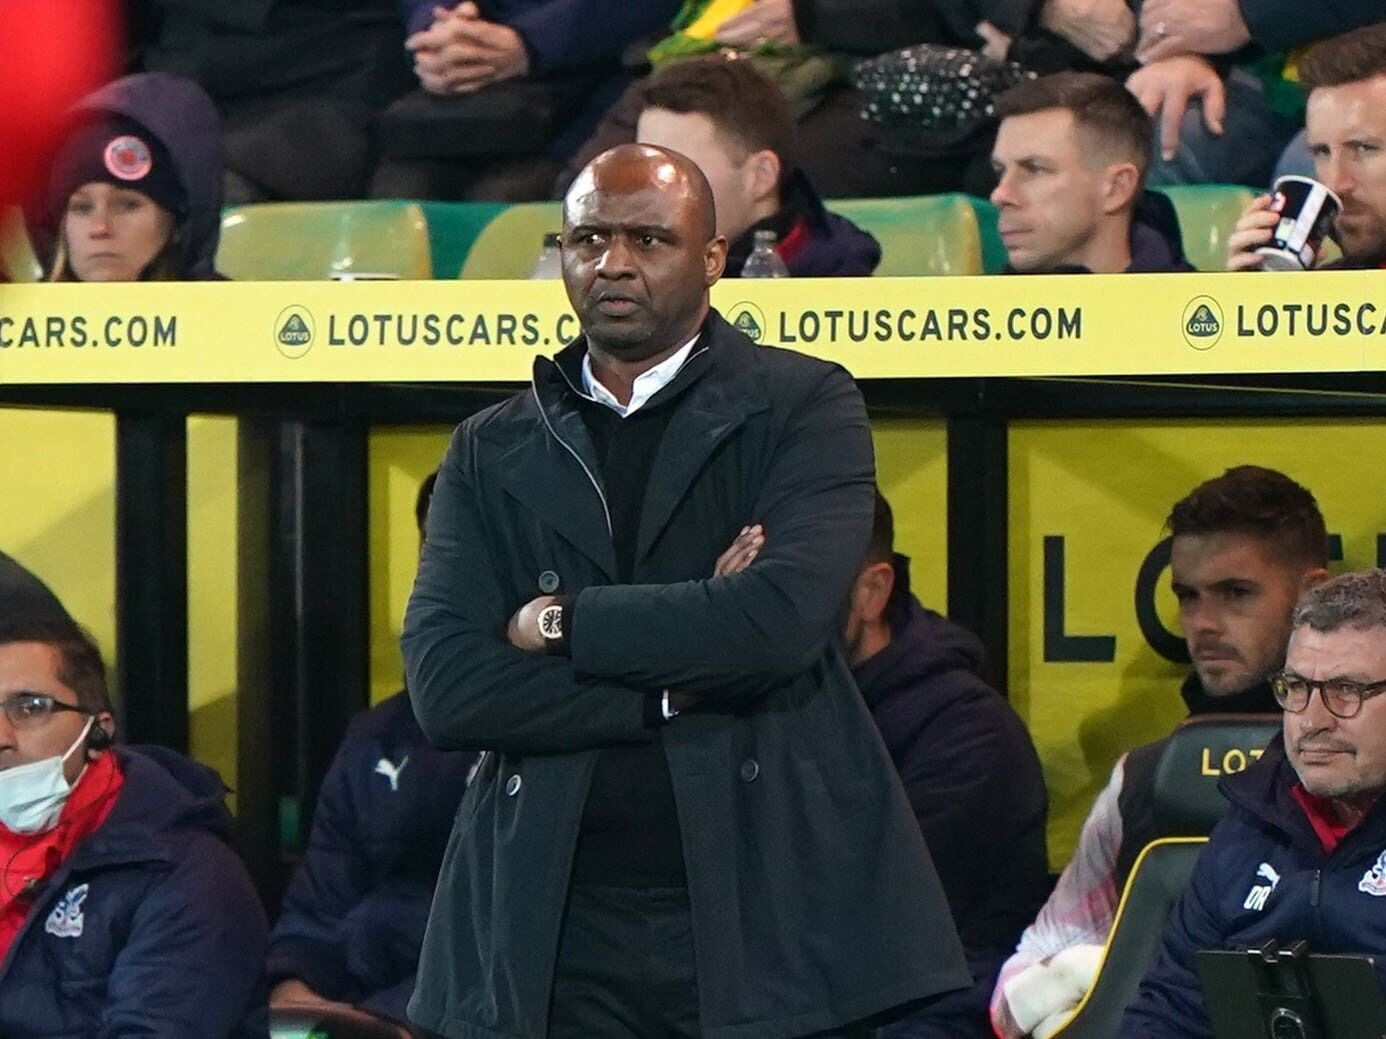 We need a win to lift our confidence, says Palace boss Patrick Vieira